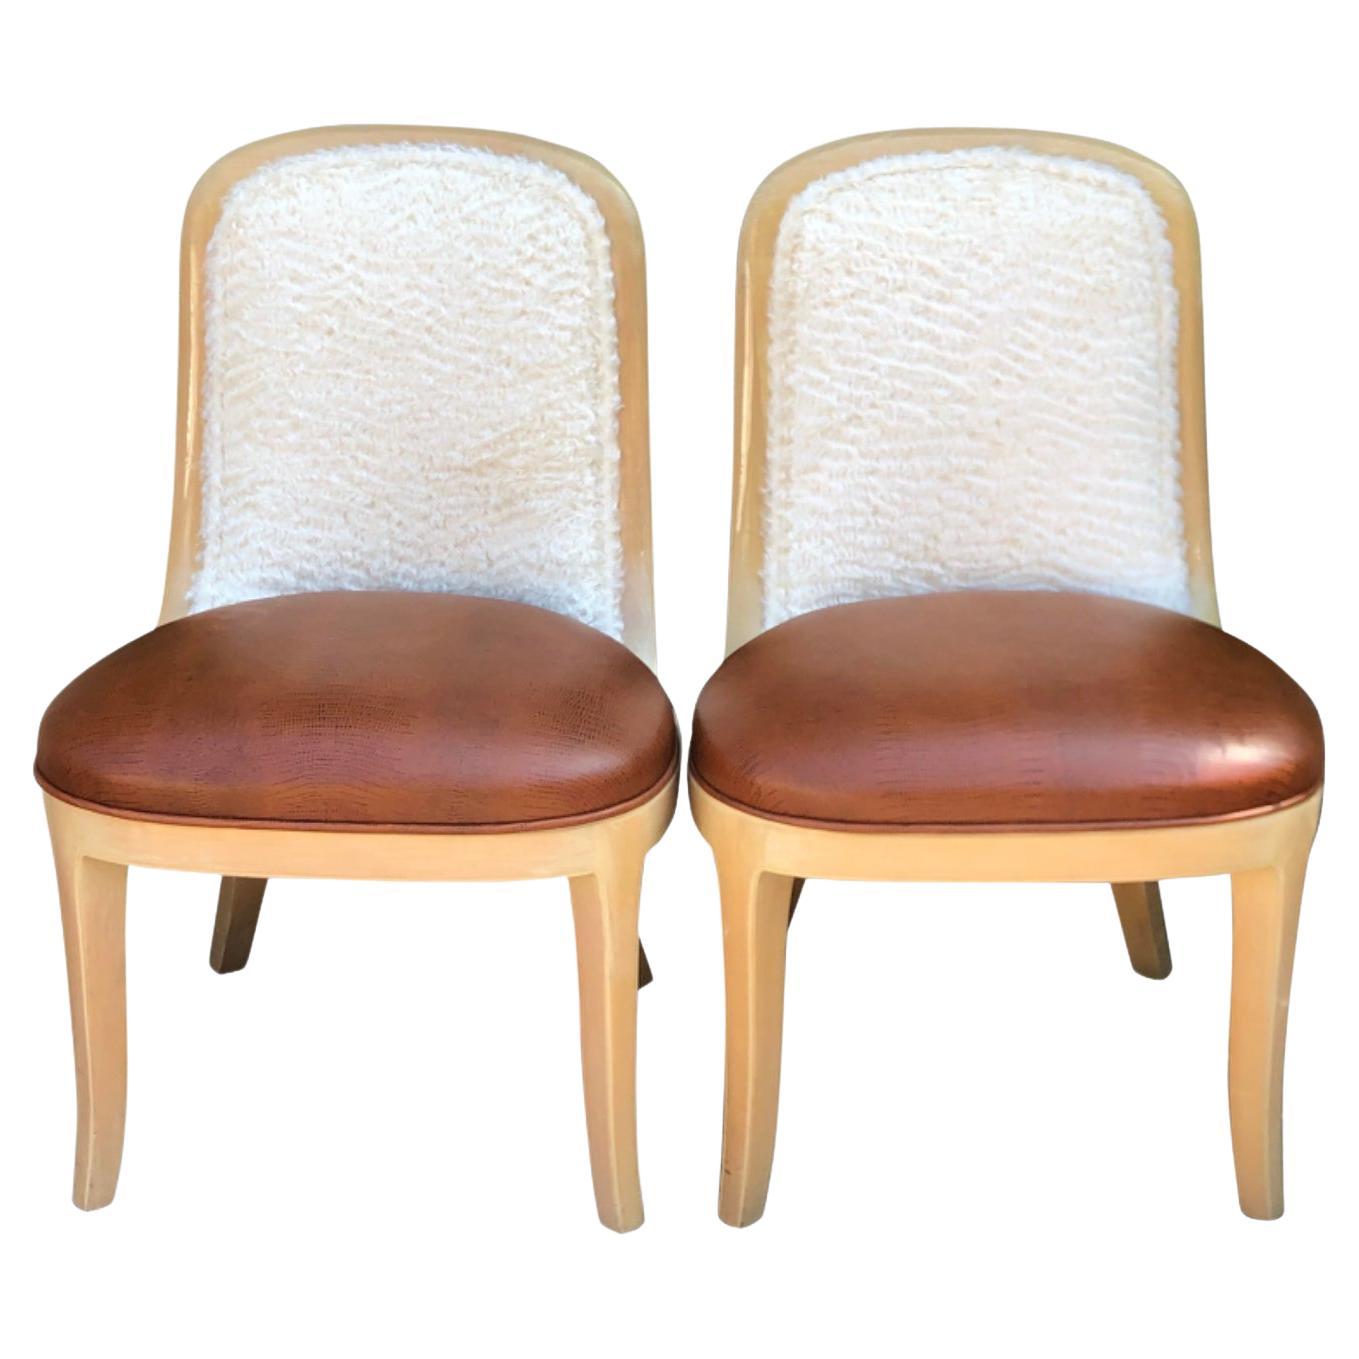 Pair of Vintage Signed Donghia Modern Designer Side Chairs by John Hutton For Sale